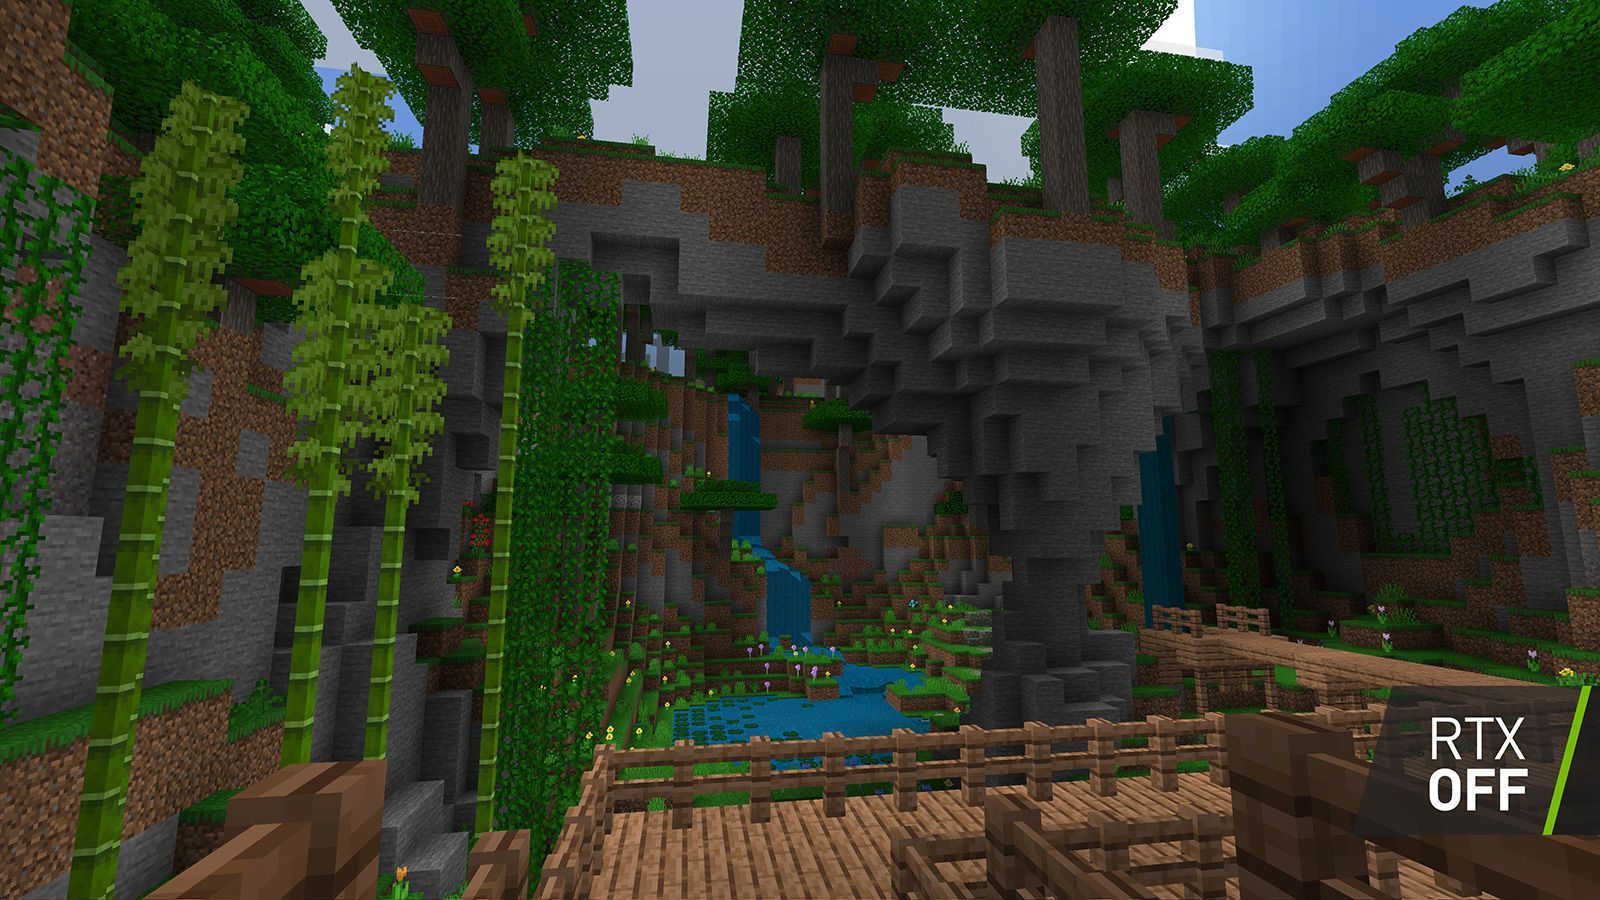 Minecraft to receive free NVIDIA RTX Ray Tracing update